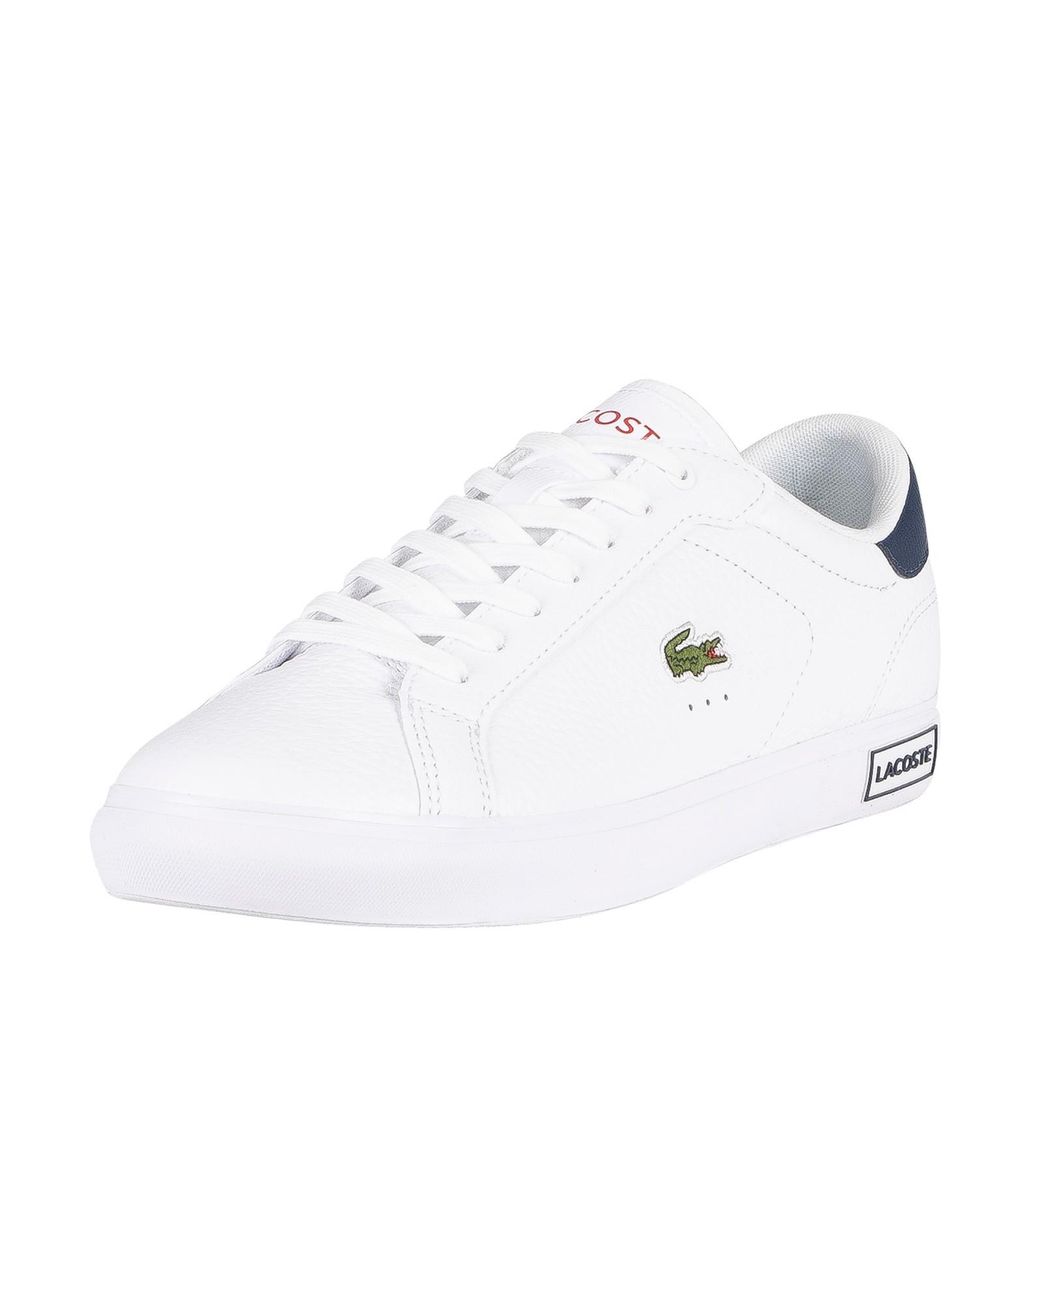 Lacoste Powercourt 0721 2 Sma Leather Trainers in White for Men | Lyst